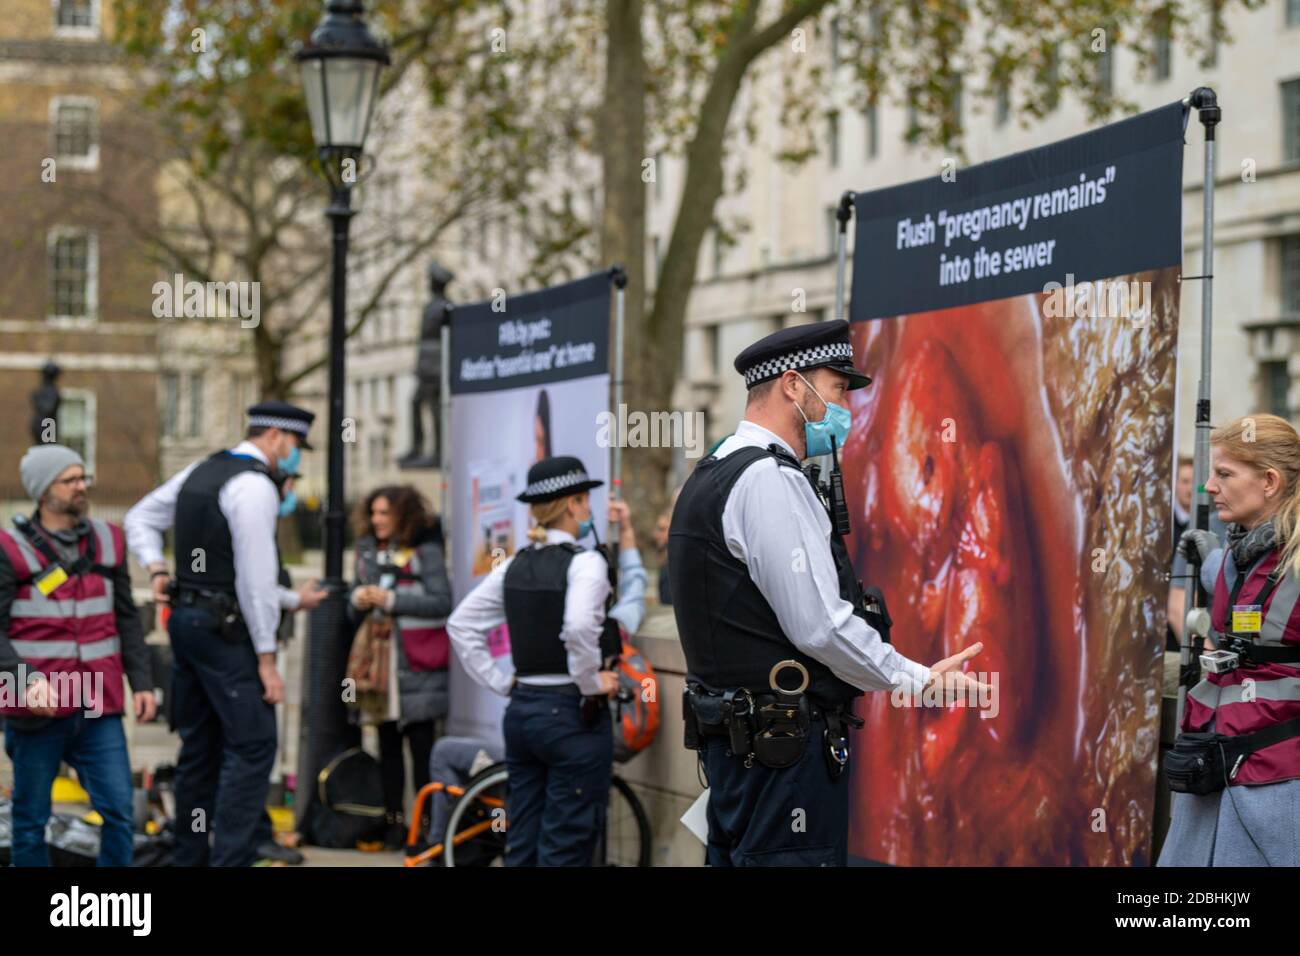 London, UK. 17th Nov, 2020. (Warning, some graphic images) Police move in to close down an anti abortion protest by the Centre for bio-ethical reform, UK, opposite Downing Street, London UK Credit: Ian Davidson/Alamy Live News Stock Photo